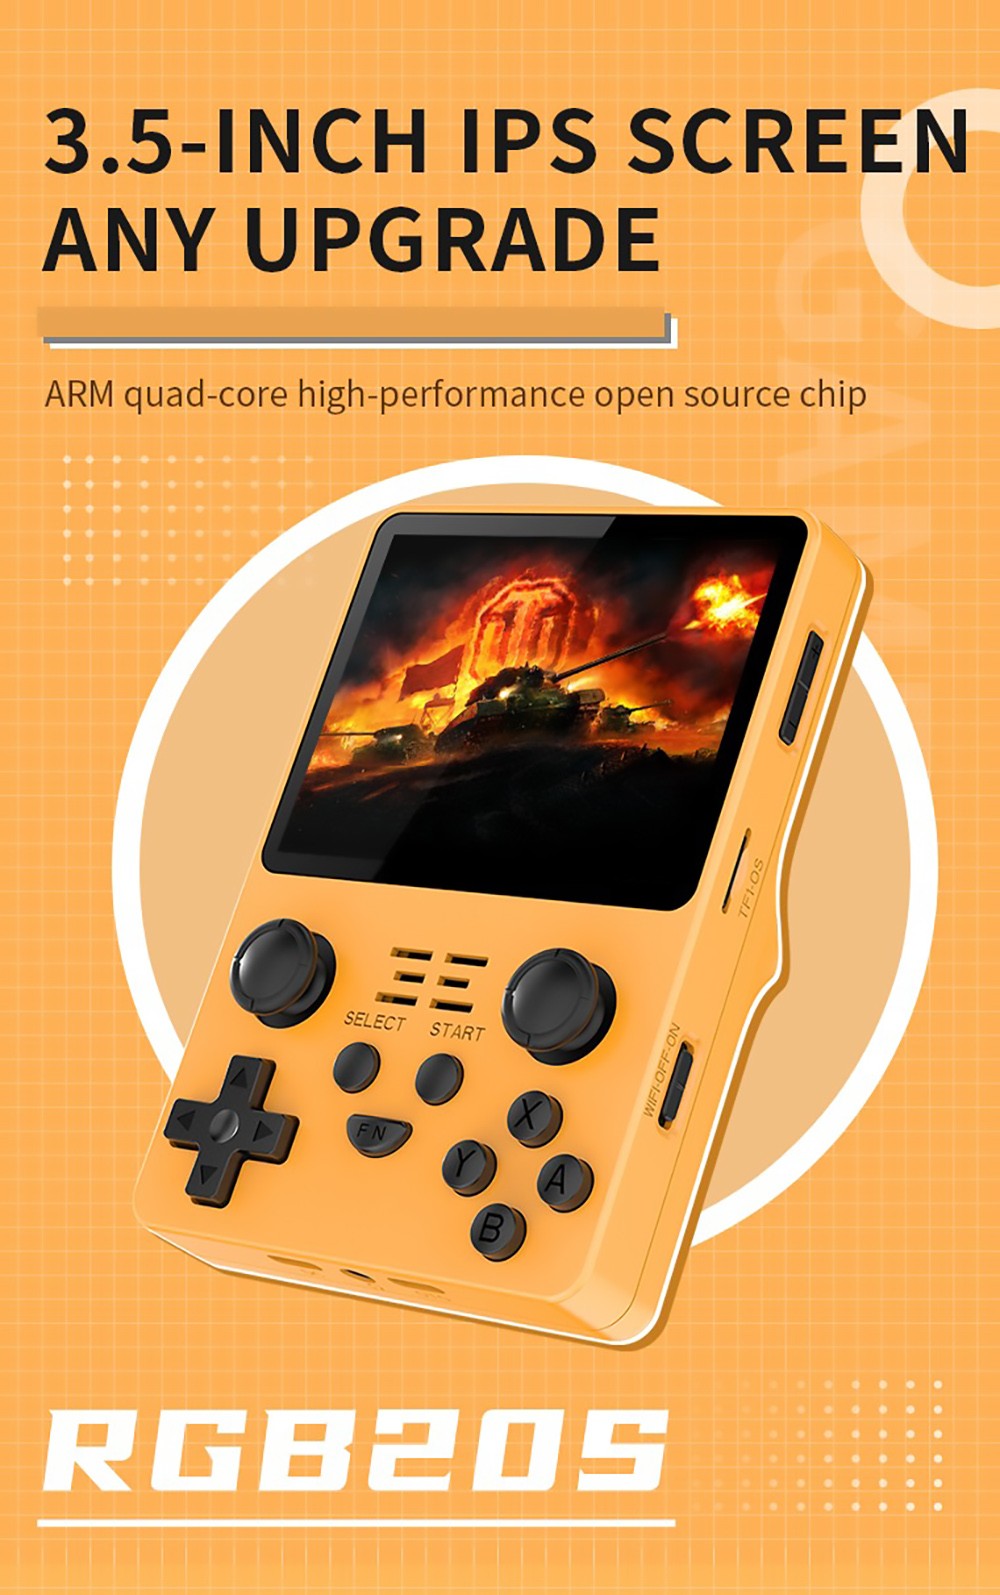 Powkiddy RGB20S Handheld Game Console 16+128GB 20,000 Games 3.5'' IPS OCA Screen Open Source for Linux - Blue